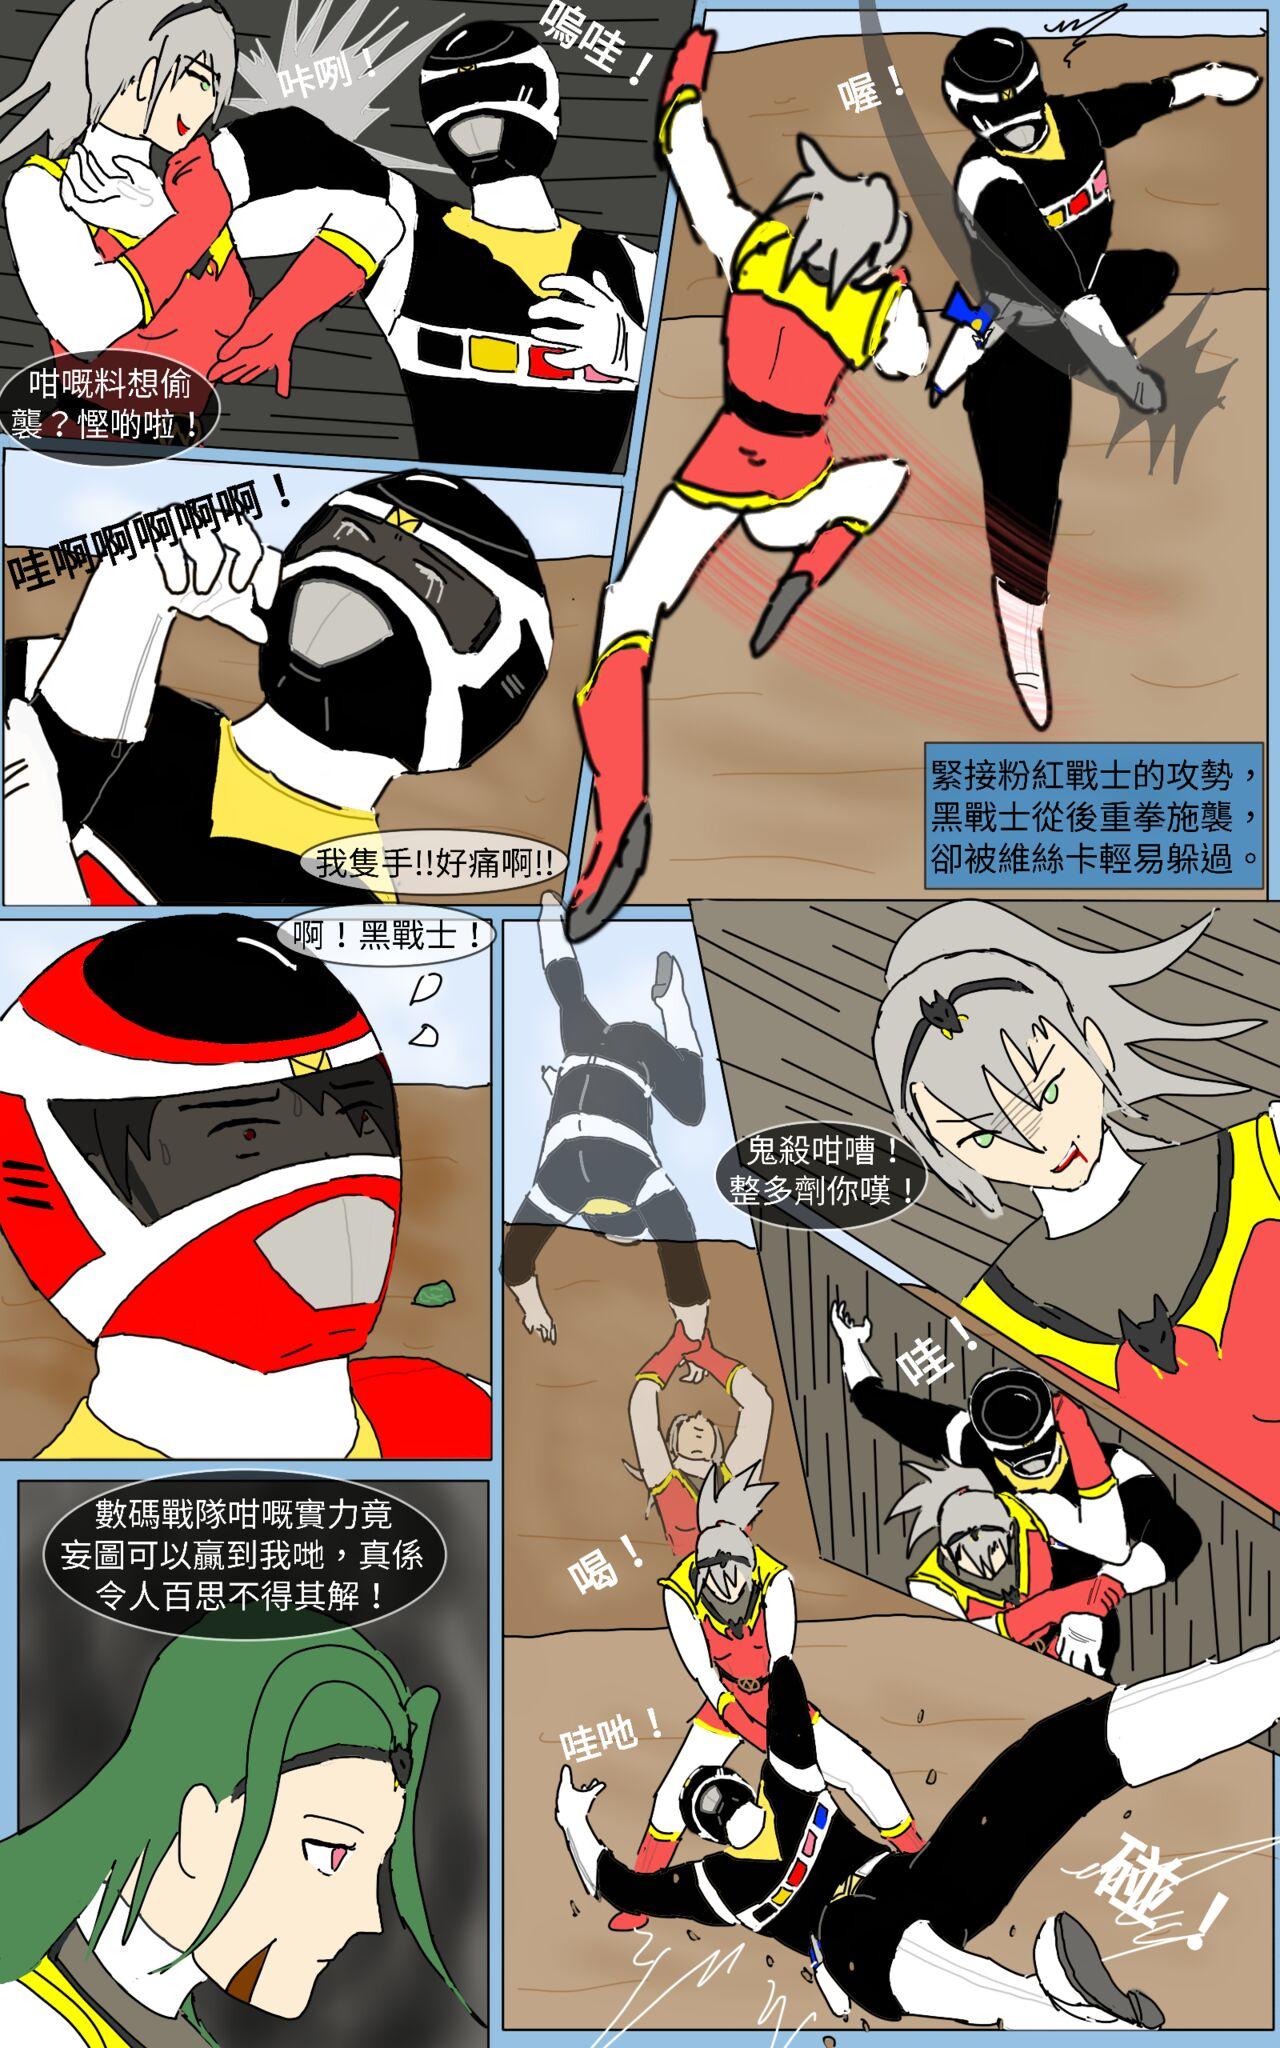 Tied Mission 16 - Super sentai High Heels - Page 11